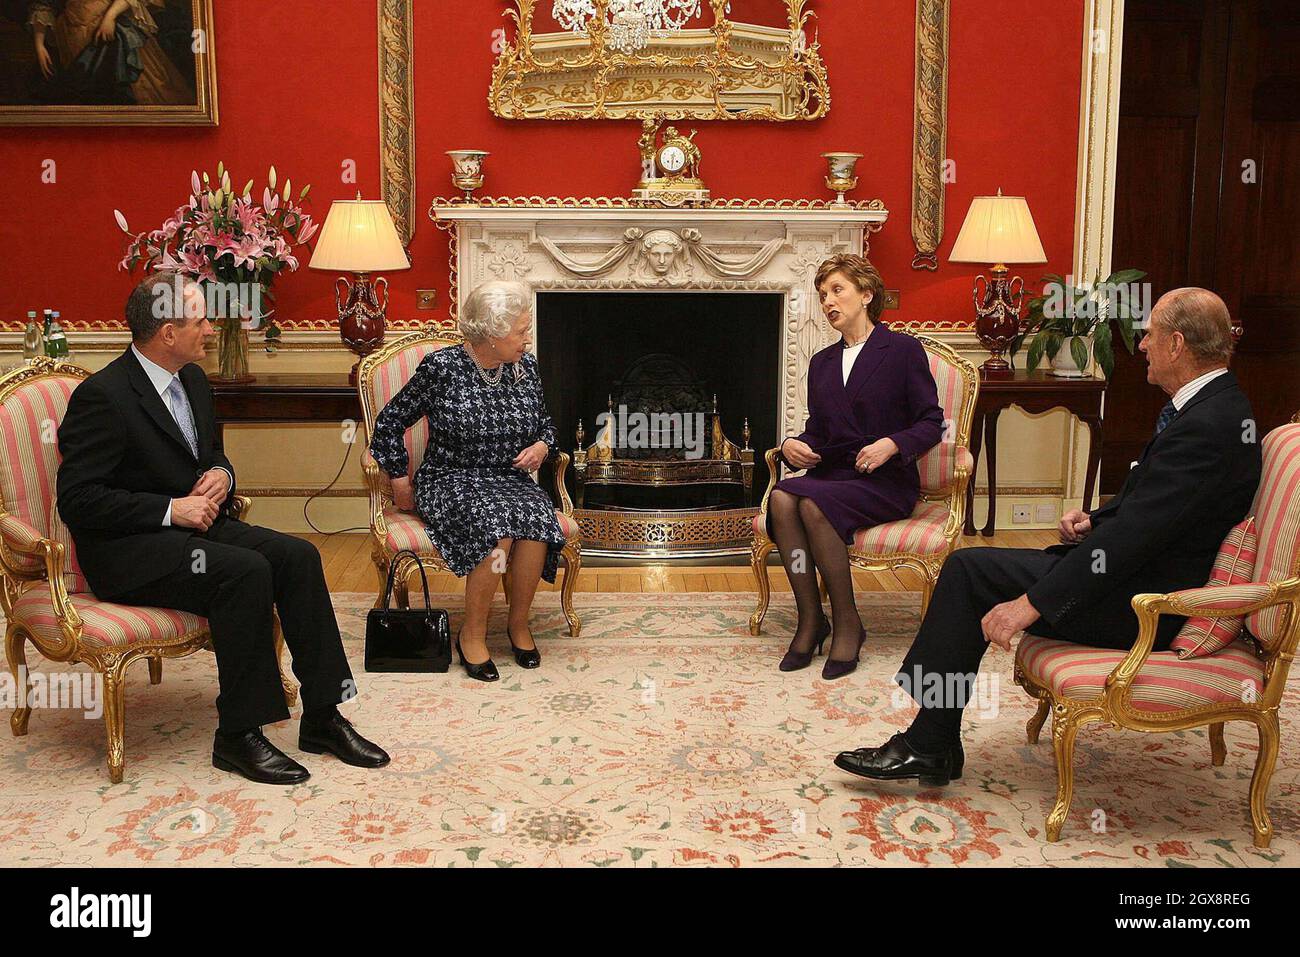 Queen Elizabeth II and Prince Philip, Duke of Edinburgh meet Irish President Mary McAleese and her husband Dr. Martin McAleese at Hillsborough Castle, Belfast. It is the Queen's first visit to Northern Ireland since February 2003. Anwar Hussein/allactiondigital.com Stock Photo